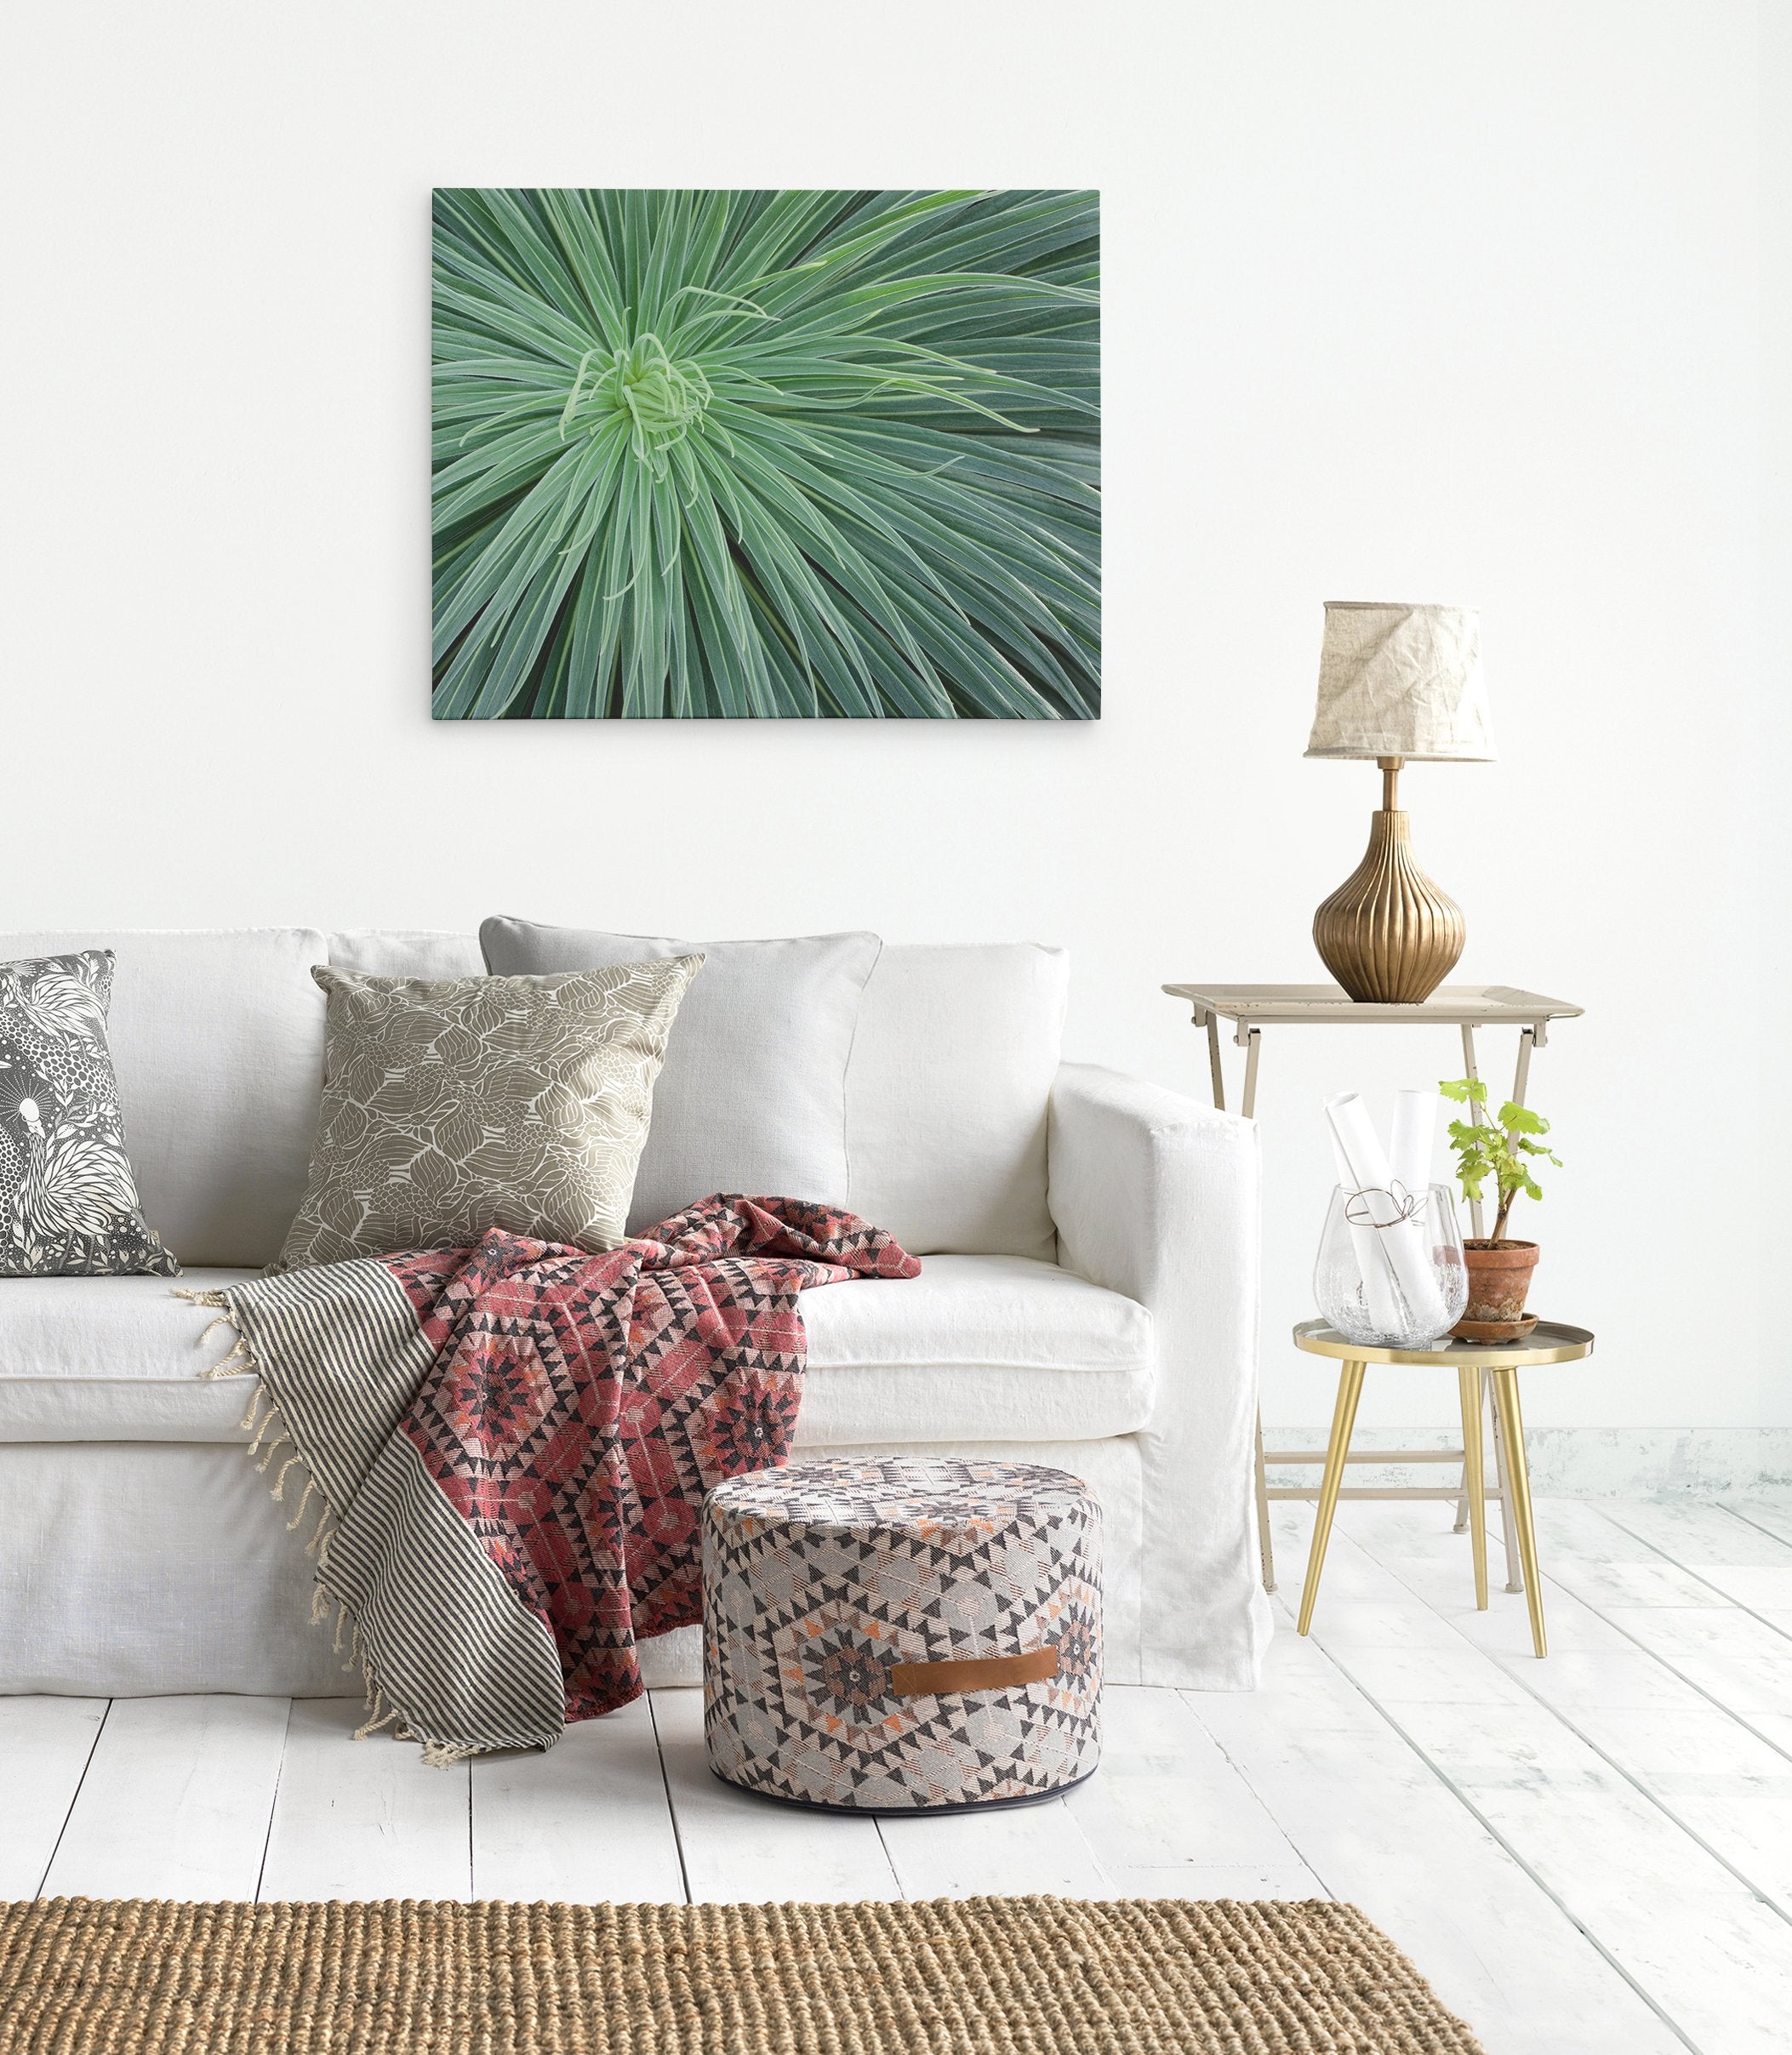 A cozy living room corner featuring a white sofa with decorative pillows, a patterned ottoman, a wooden side table with a lamp, and an Offley Green Abstract Green Botanical Canvas Wall Art, 'Desert Fireworks' with desert plants image